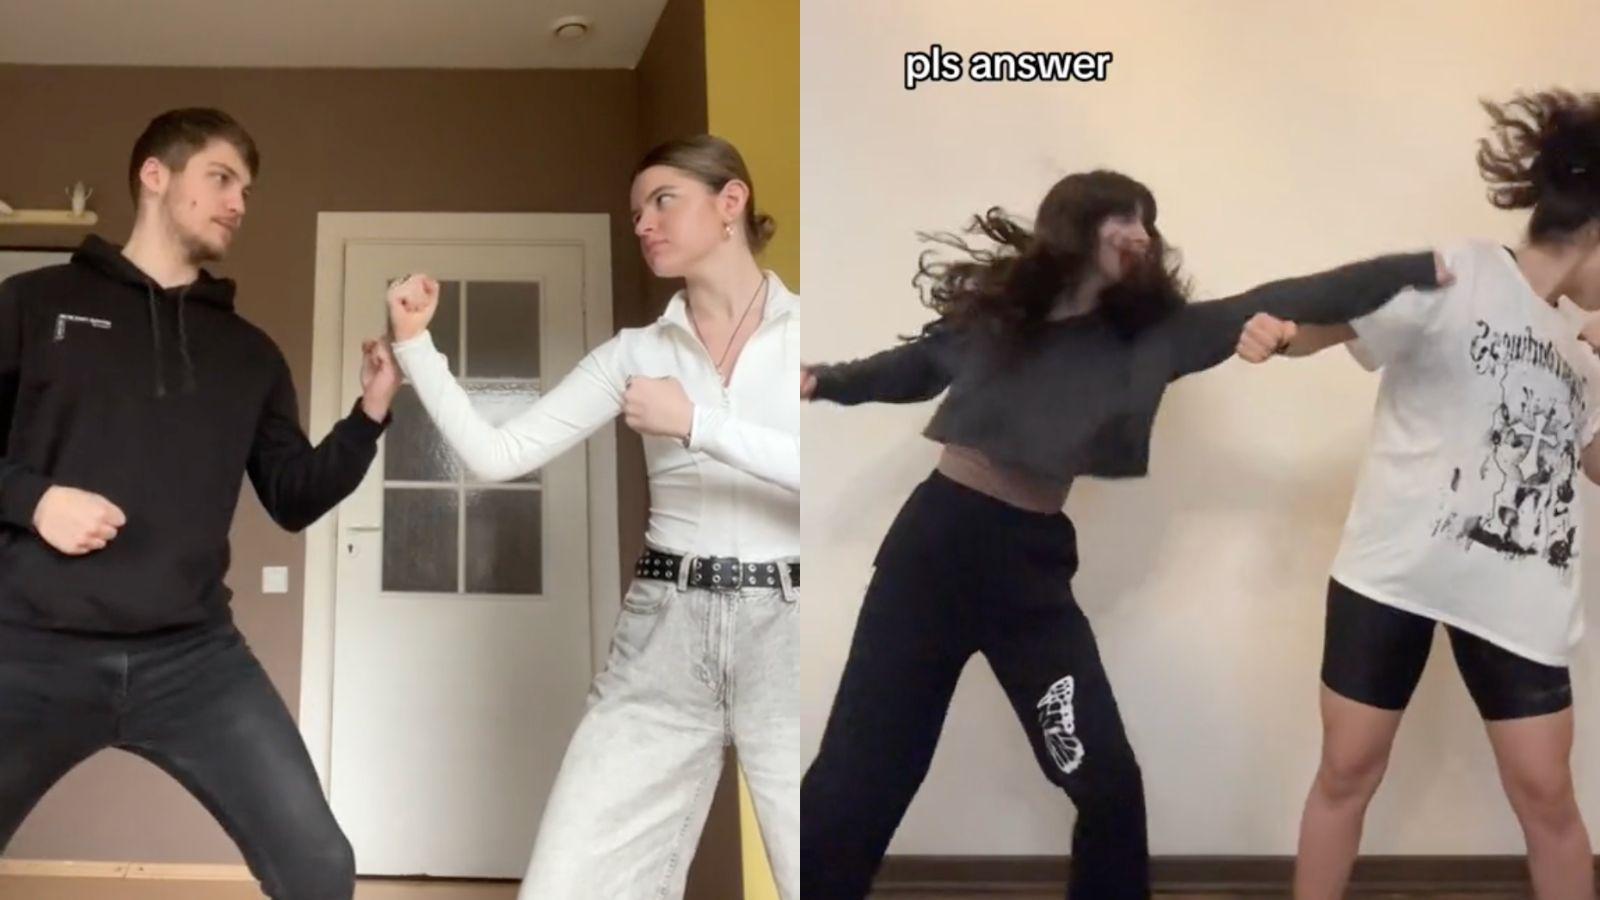 A new TikTok trends sees people pretend to be game characters